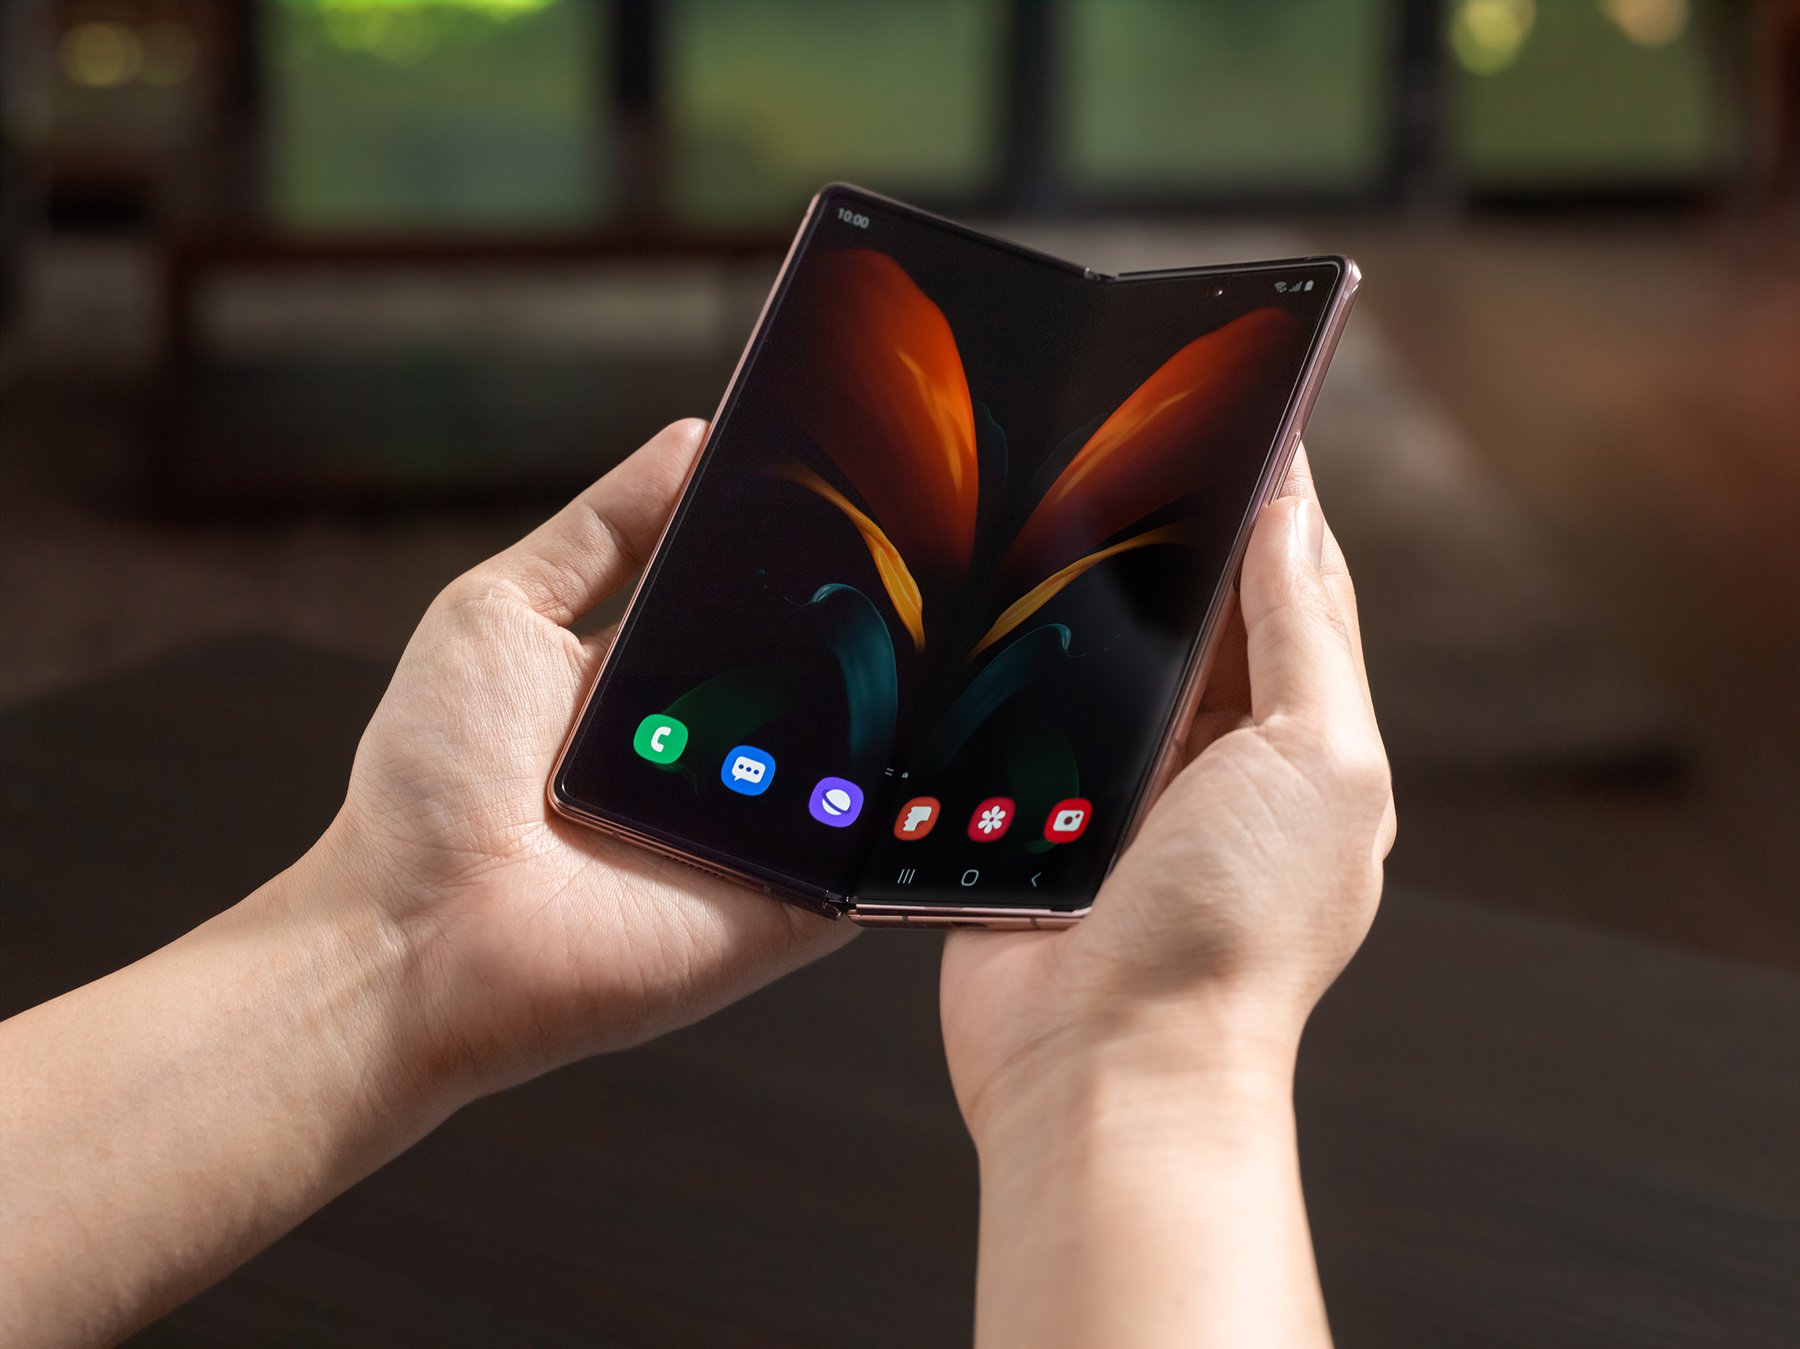 Over 5.1 million foldable and rollable phones expected in 2021 from 8